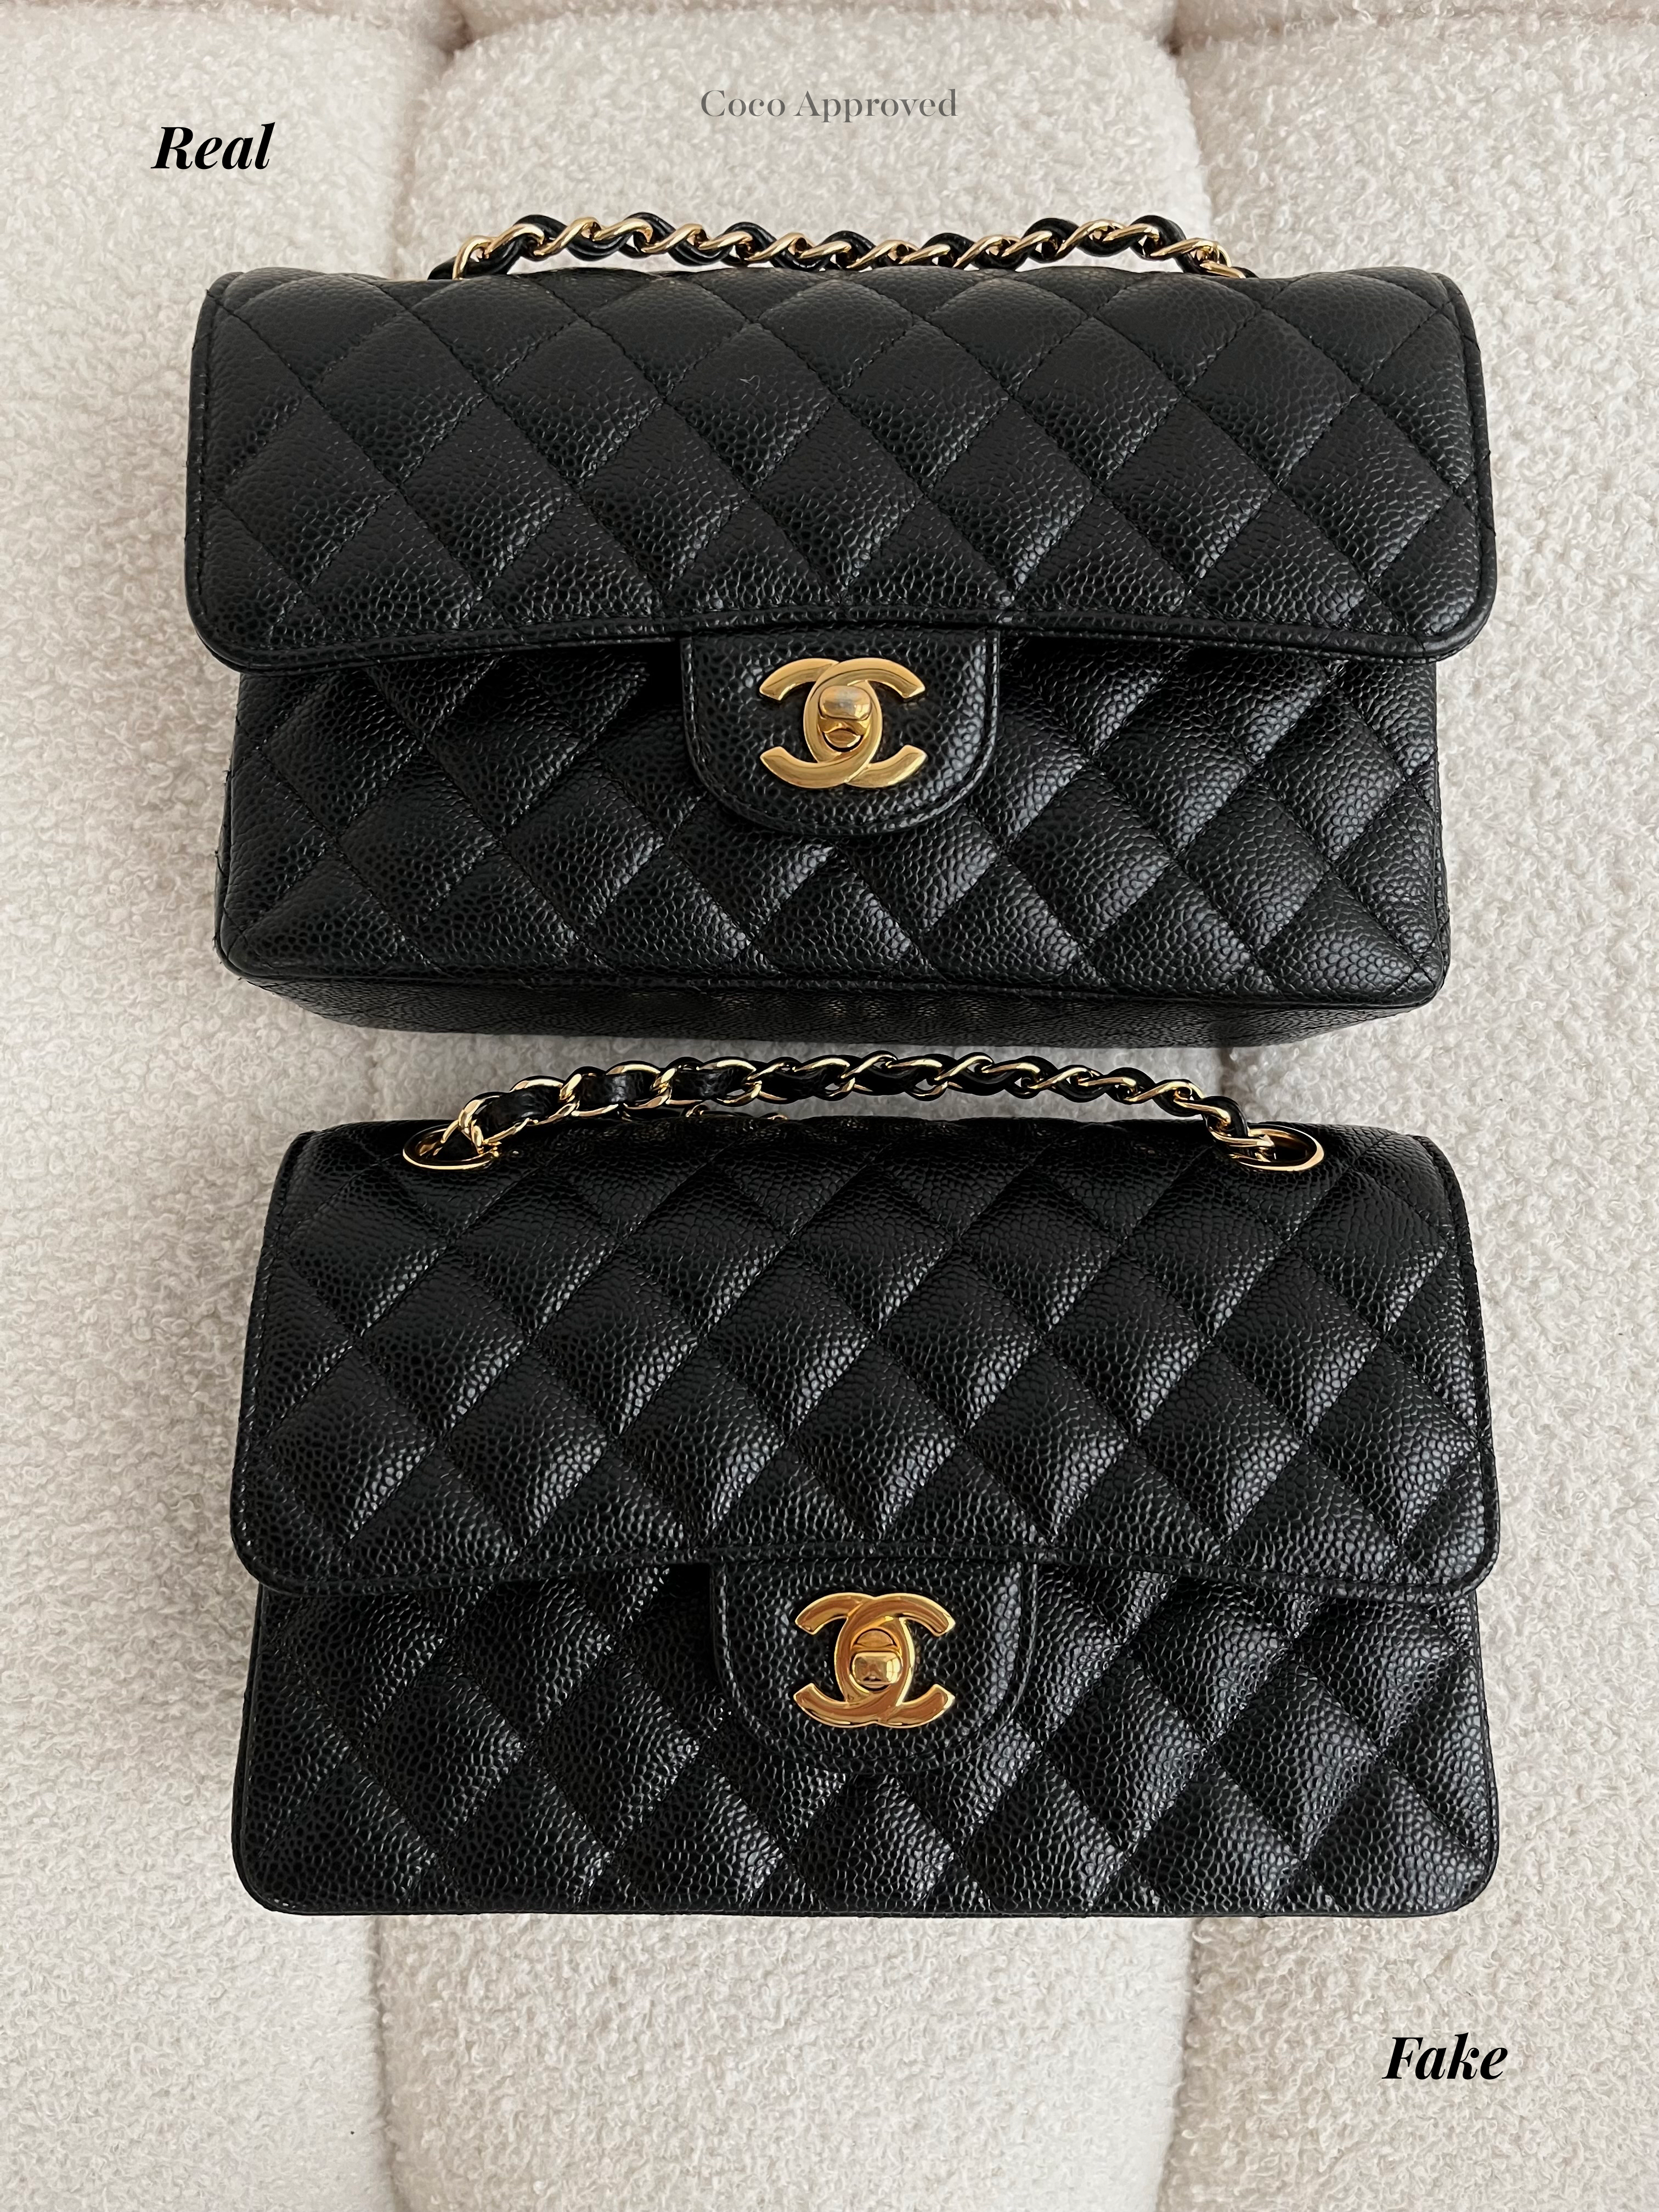 how to spot a real Chanel bag from a fake ?